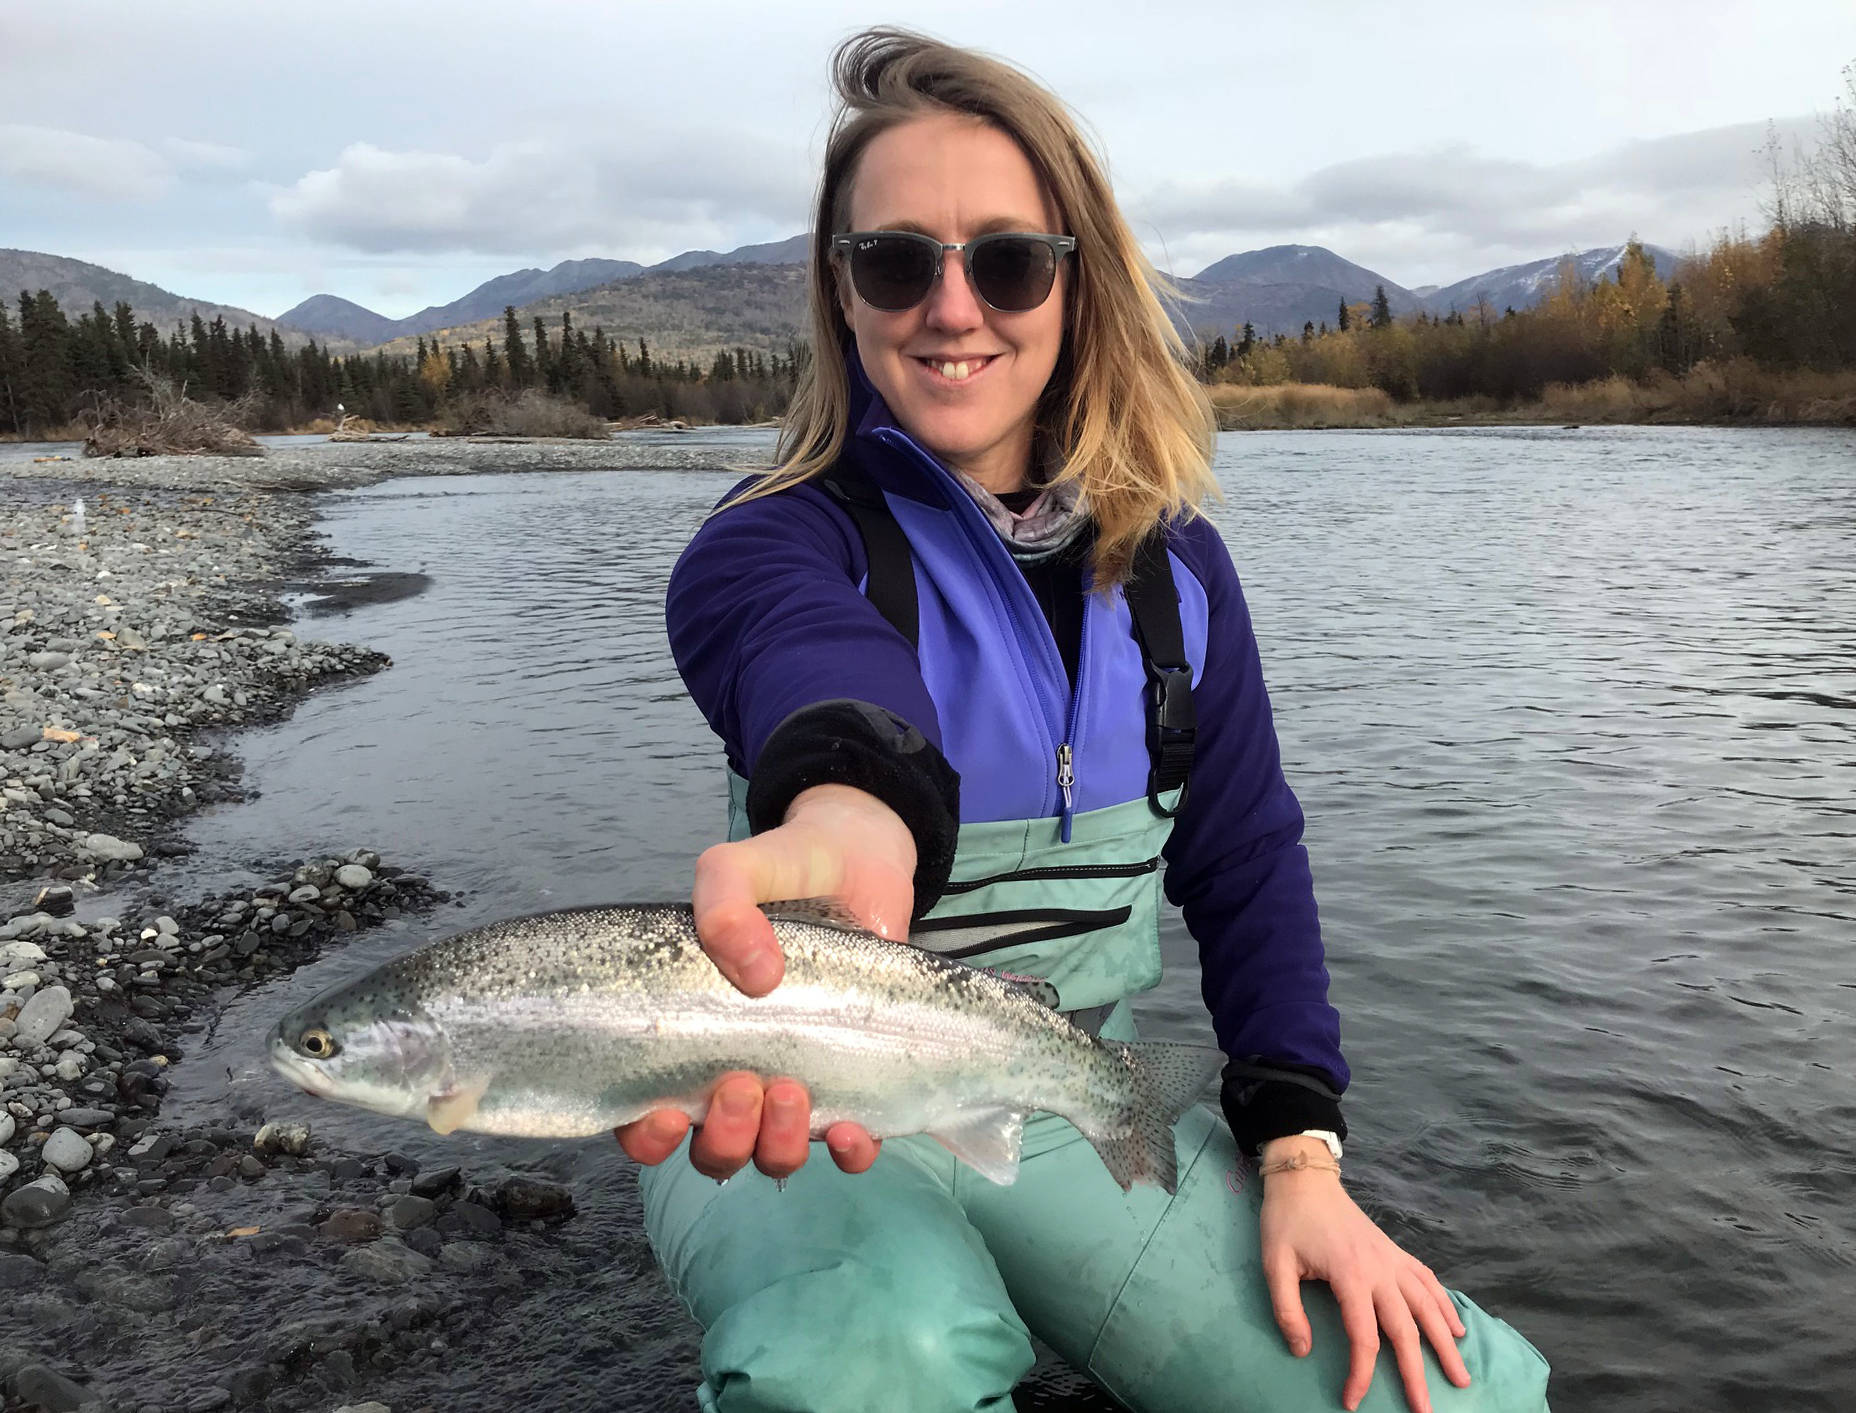 Novice fly angler and writer of this story holds out a rainbow trout she managed to catch on her first fly fishing trip with Michael Tuhy and Brant Koetting of Tower Rock Lodge in the Upper River Kenai in Alaska on Oct. 11. (Photo by Kat Sorensen/Peninsula Clarion) Novice fly angler and writer of this story holds out a rainbow trout she managed to catch on her first fly fishing trip with Michael Tuhy and Brant Koetting of Tower Rock Lodge in the Upper River Kenai in Alaska on Oct. 11, 2017. (Photo by Kat Sorensen/Peninsula Clarion)